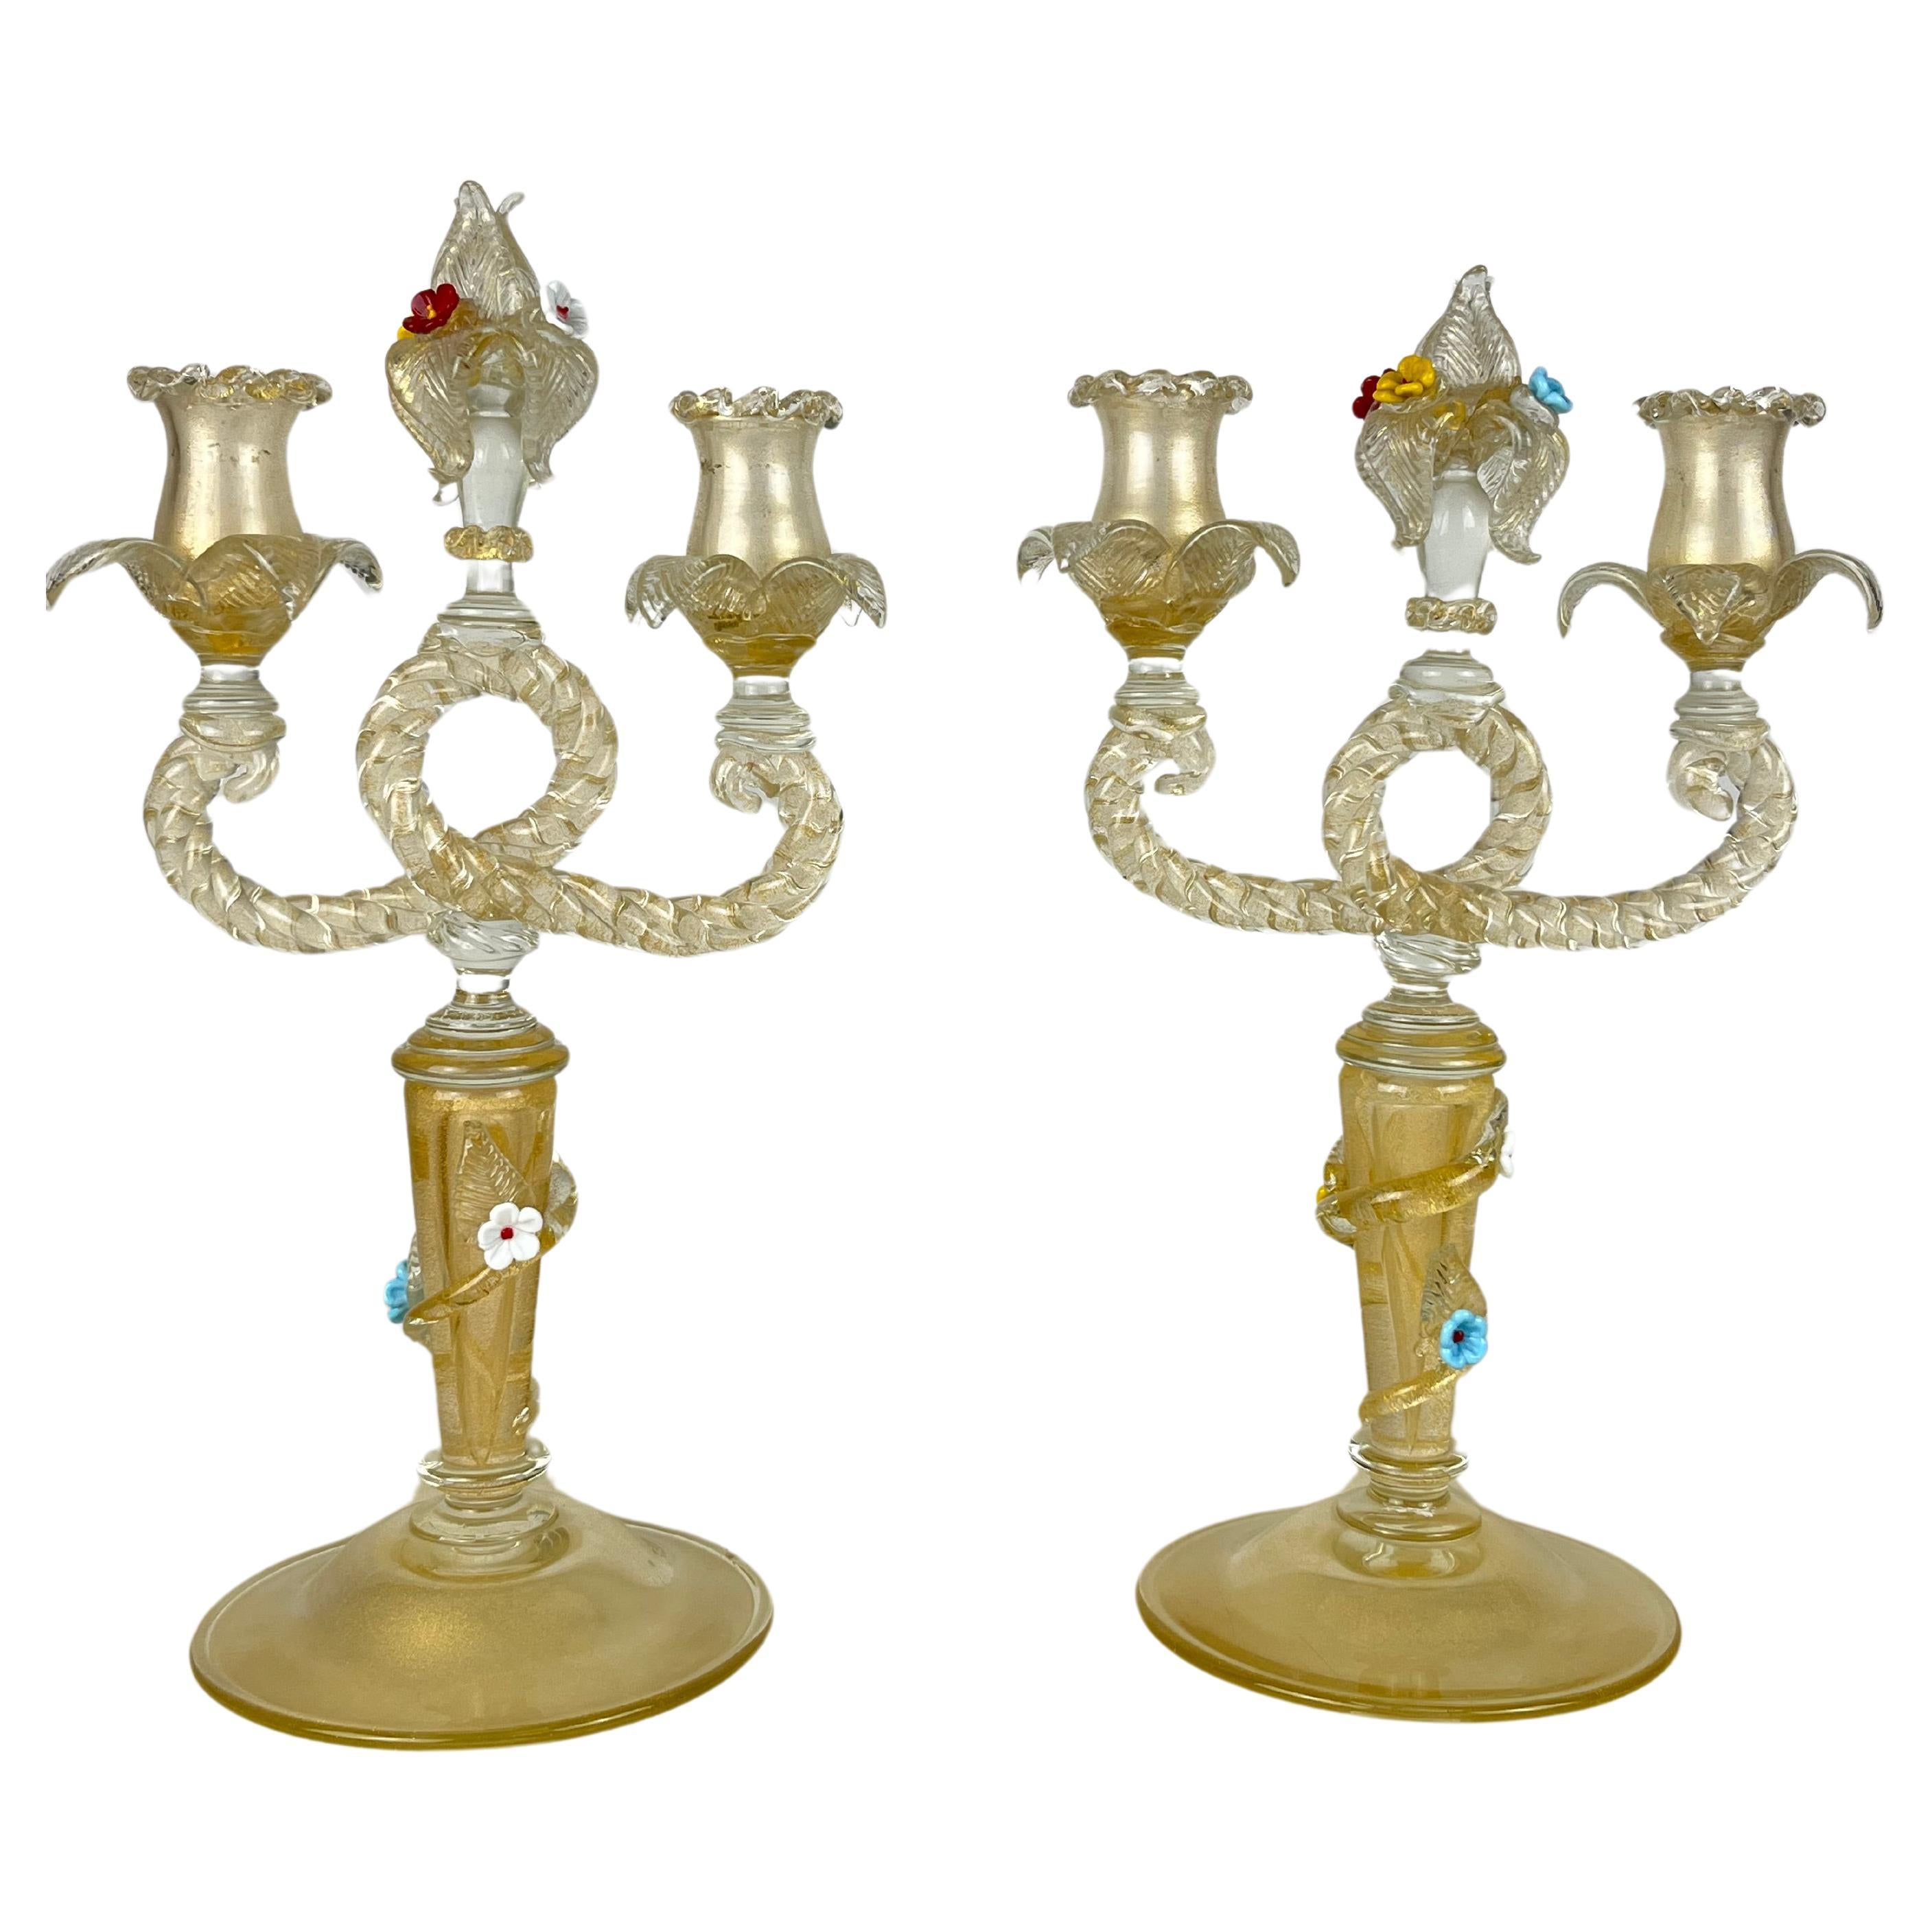 Set of 2 Murano glass candlesticks attributed to Barovier & Toso, Italy, 1960s
Purchased by my maternal great-grandparents in Venice in one of the most renowned shops in Piazza San Marco.
Intact and in excellent condition, they are very beautiful